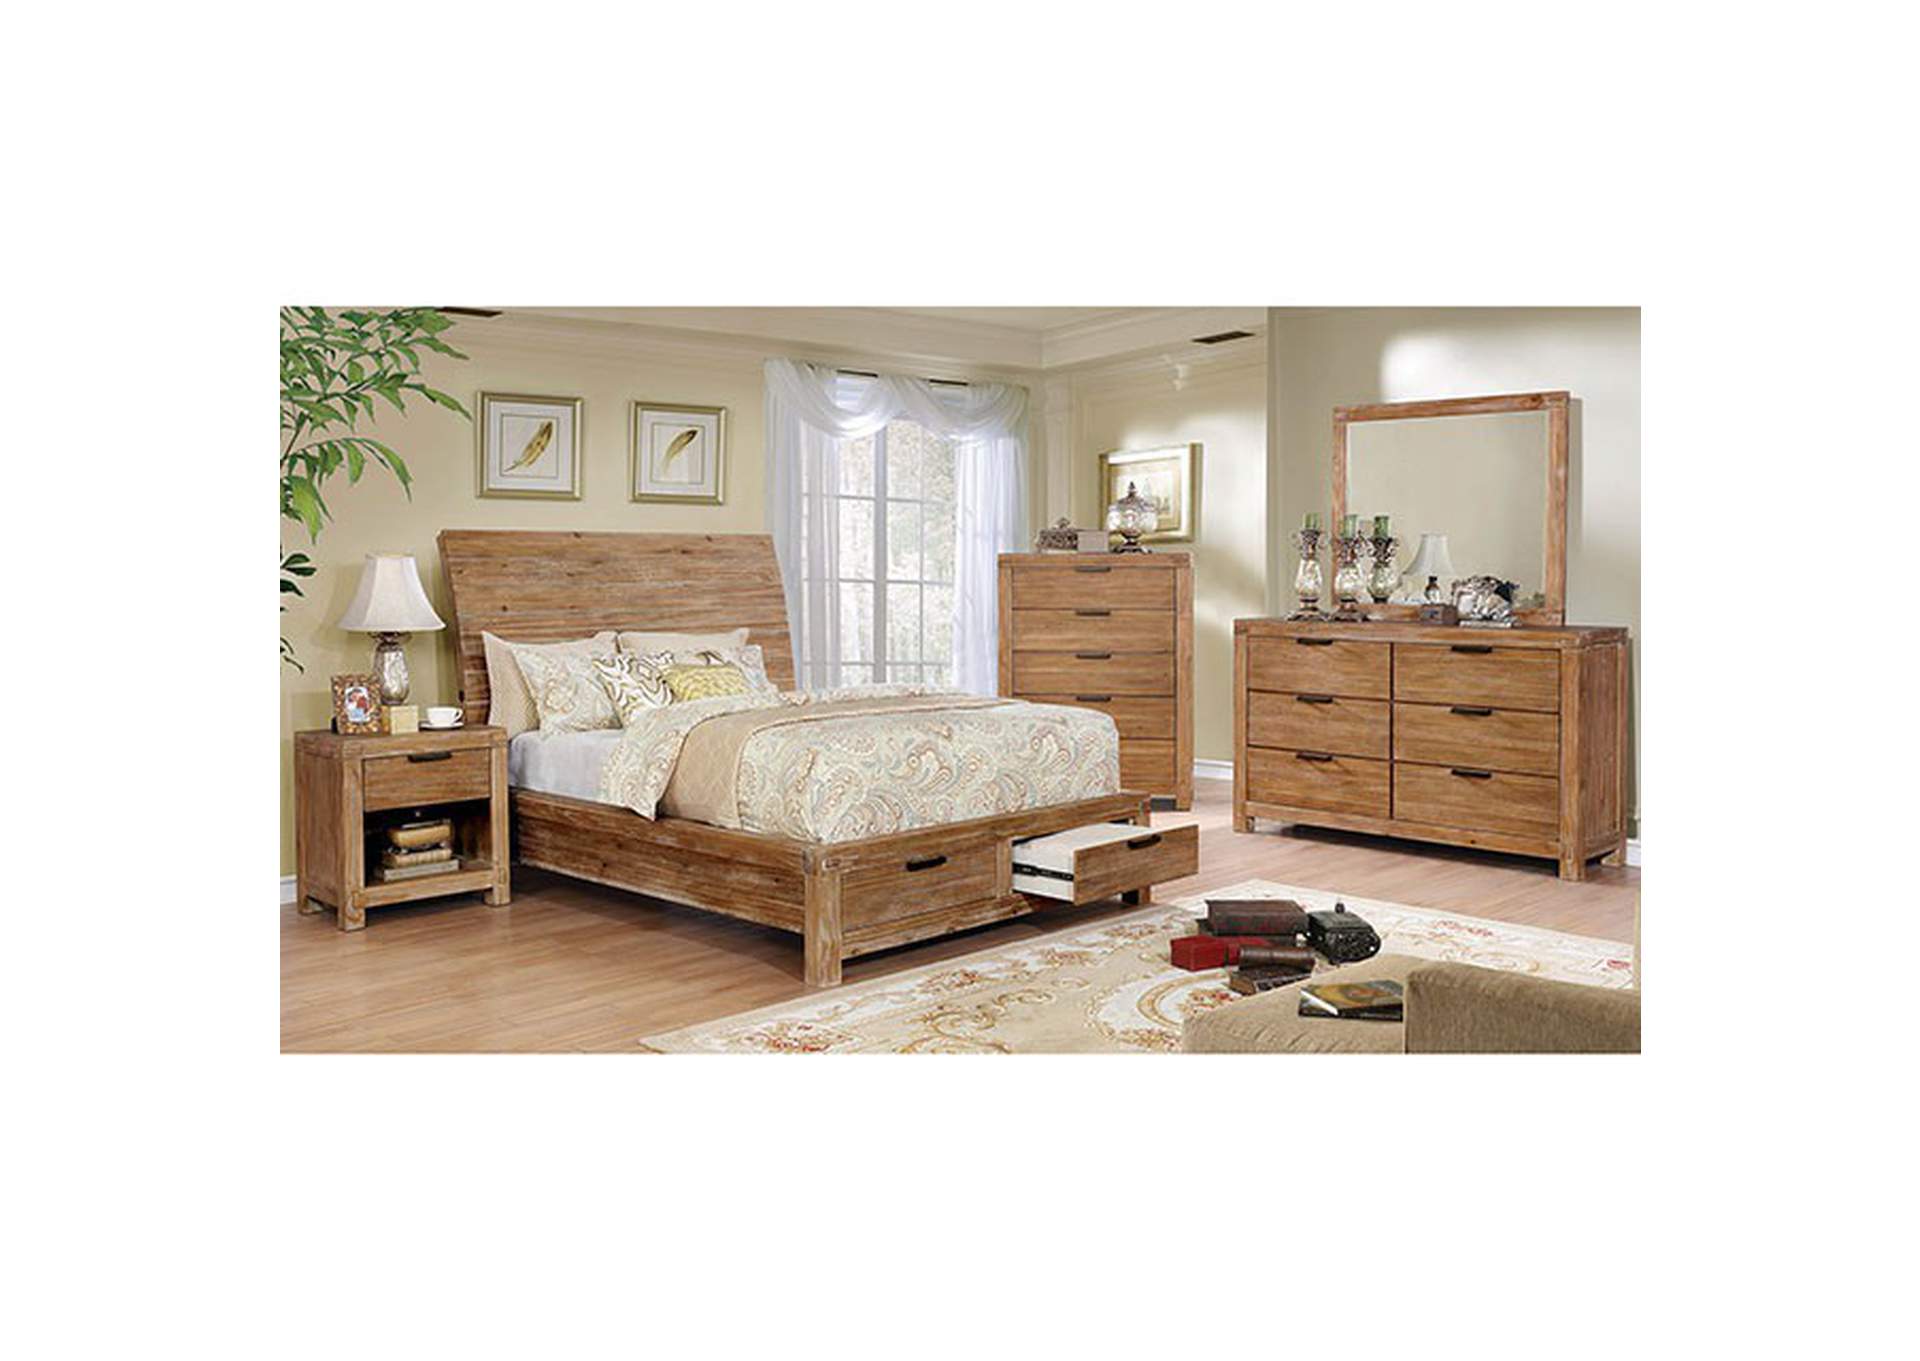 Dion Cal.King Bed,Furniture of America